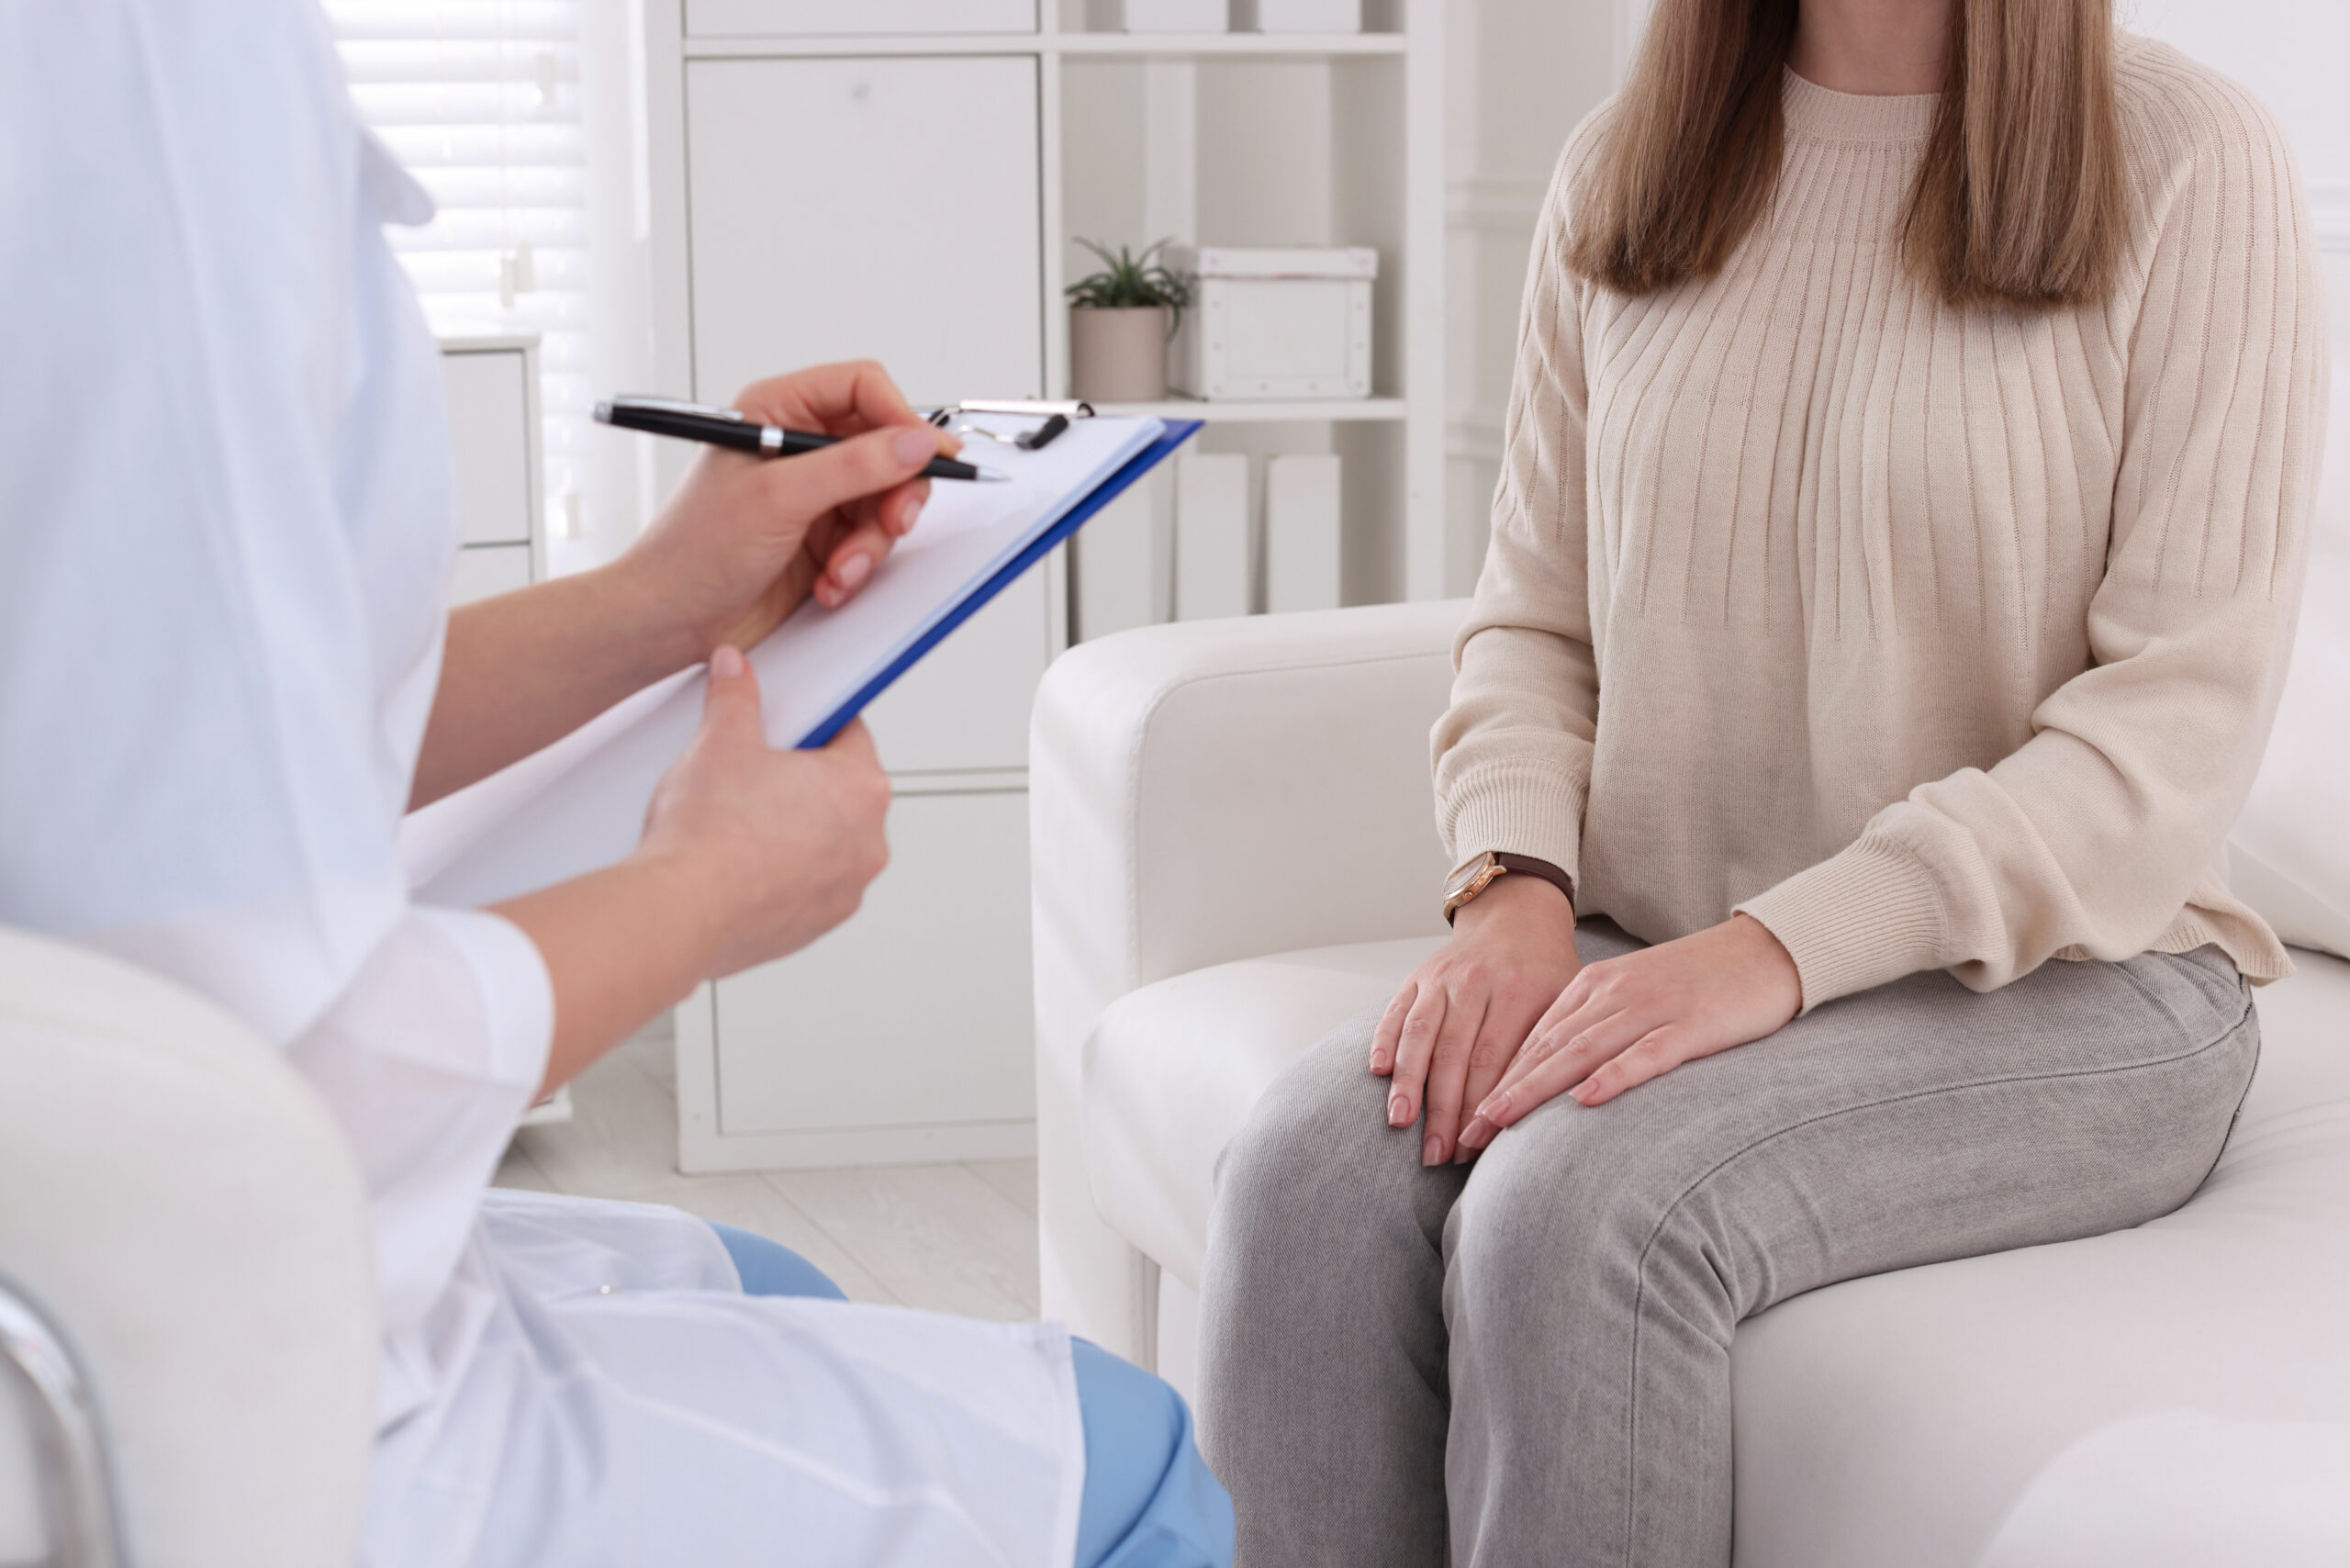 A potential surrogate sits across from a medical professional who is conducting a psychological screening.